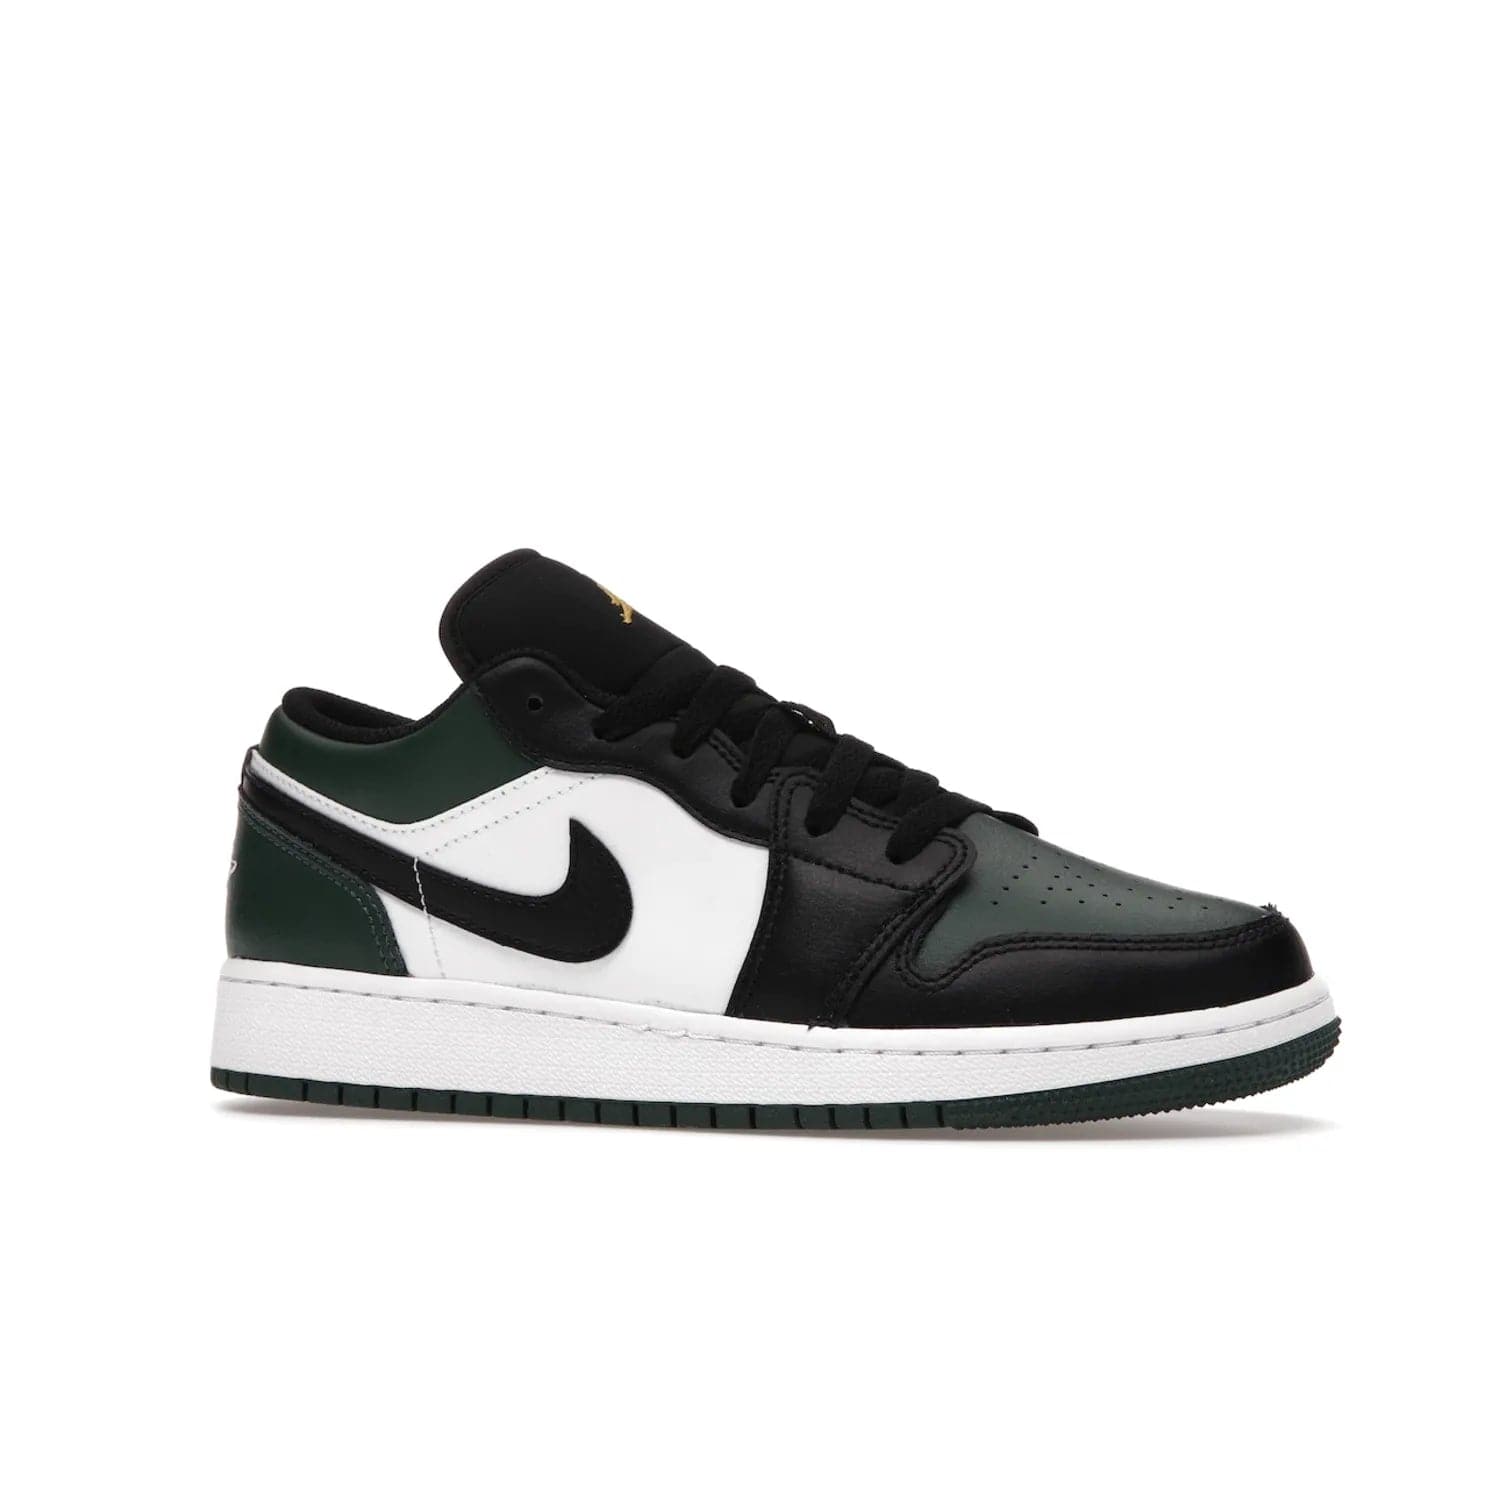 Jordan 1 Low Green Toe (GS) - Image 3 - Only at www.BallersClubKickz.com - Get the perfect low cut Jordans. Shop the Air Jordan 1 Low Noble Green GS shoes with its unique colorway and stencil Jumpman logo. Available October 2021.